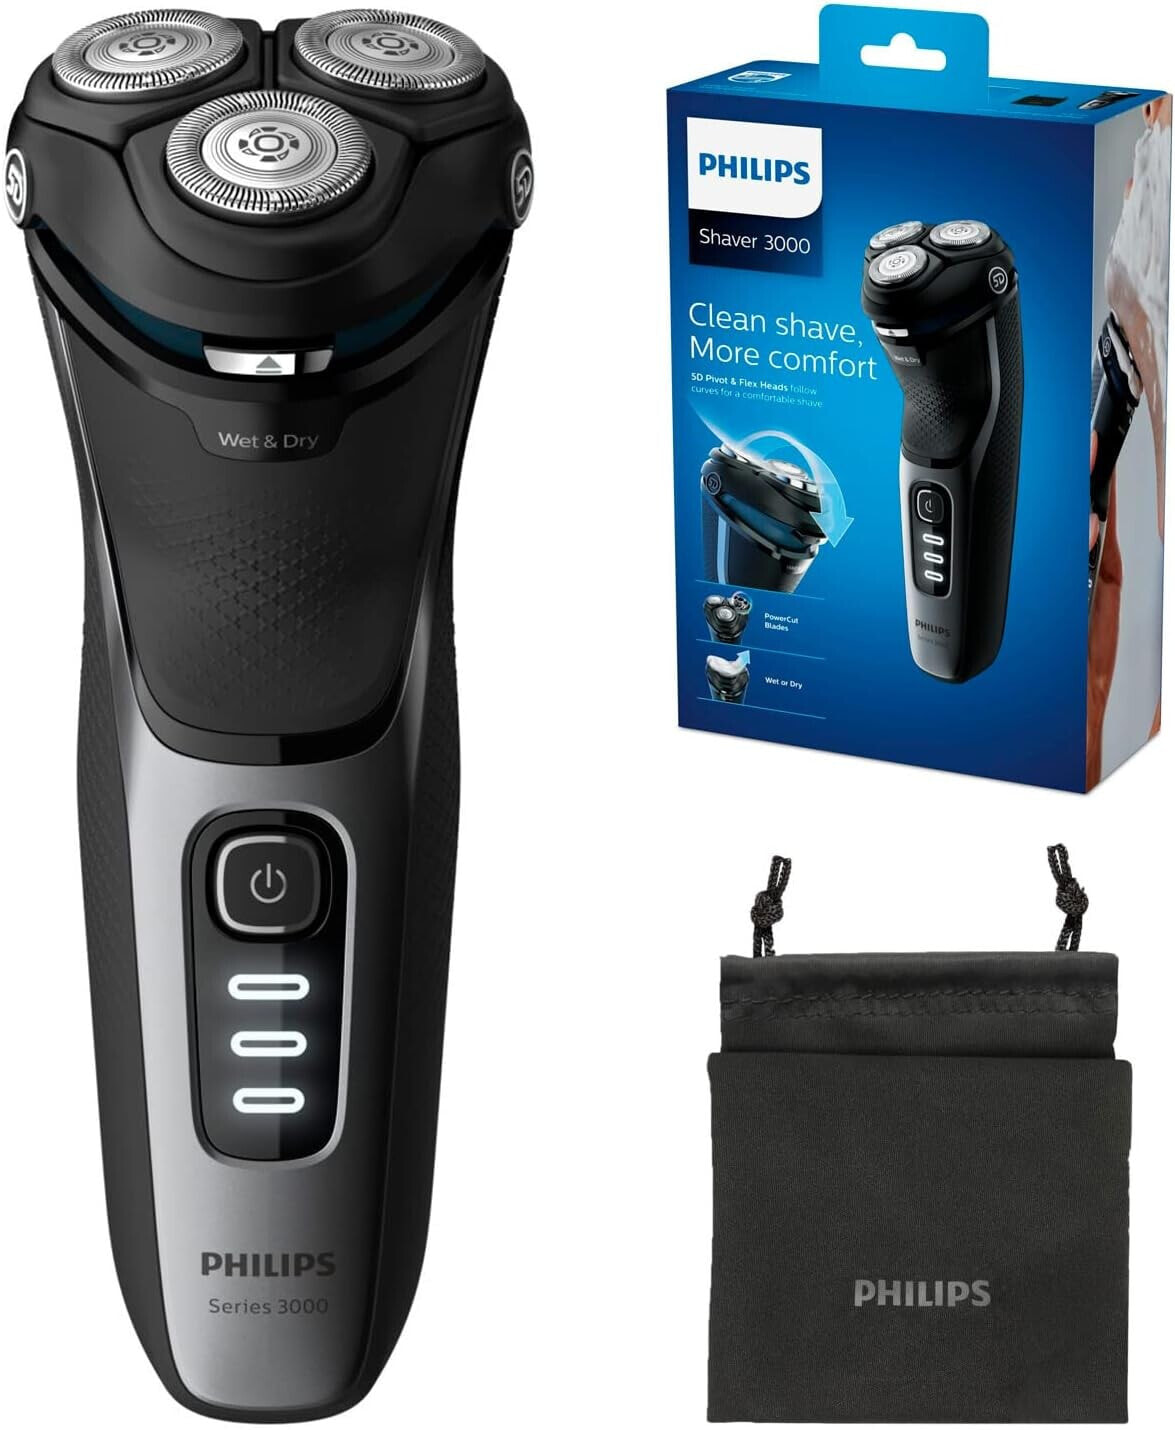 Philips PHI-S3231/52 shaver